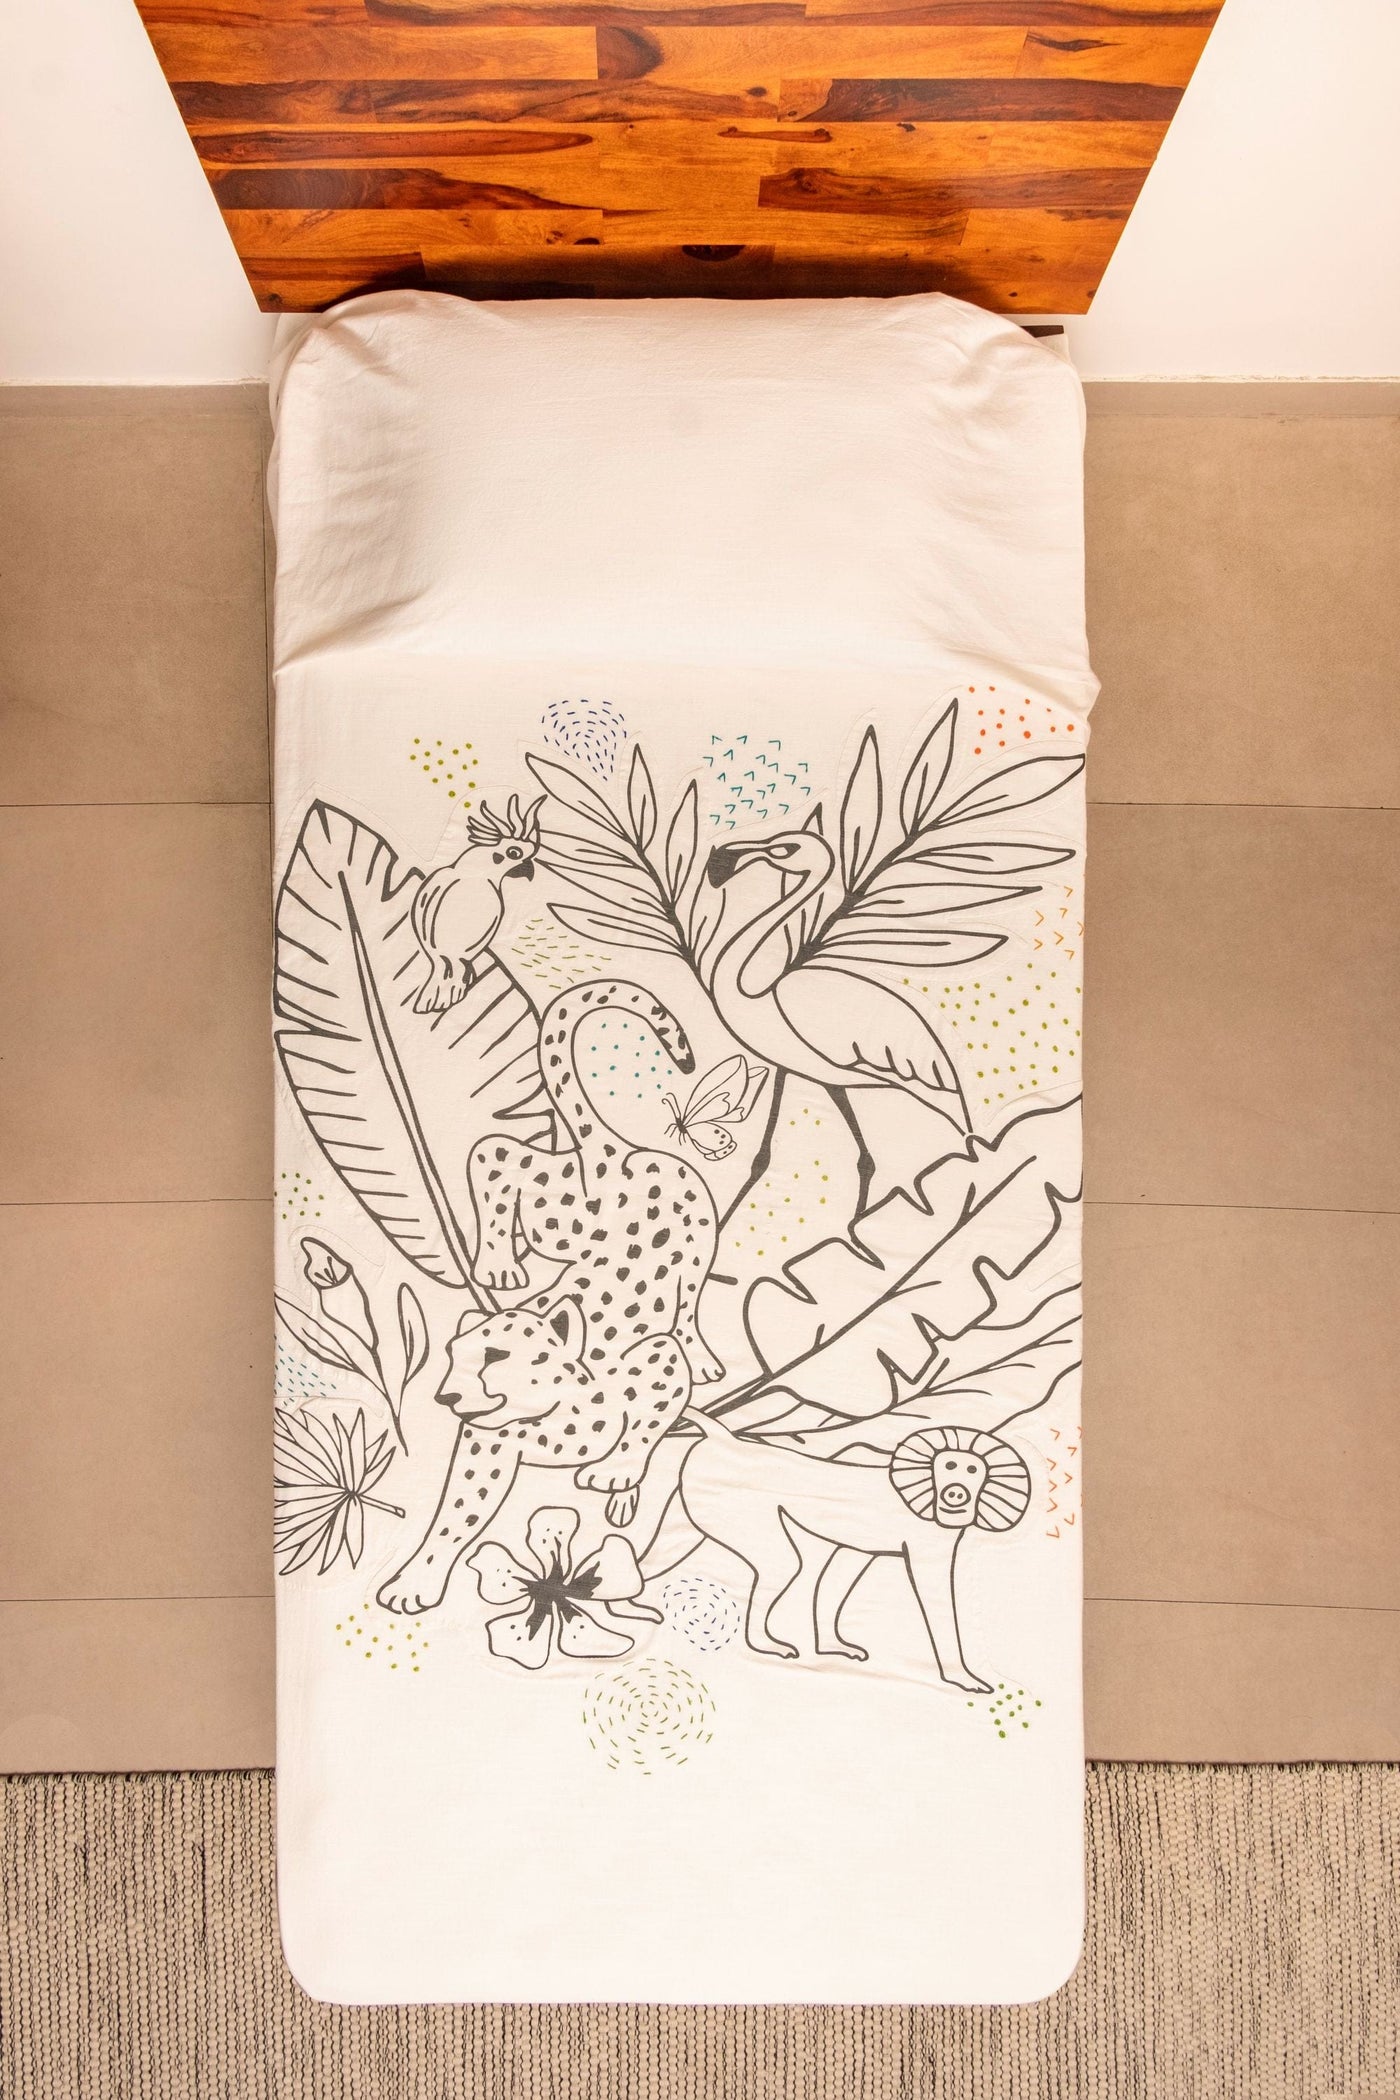 Zookeeper My Colouring Bed Cover-Single